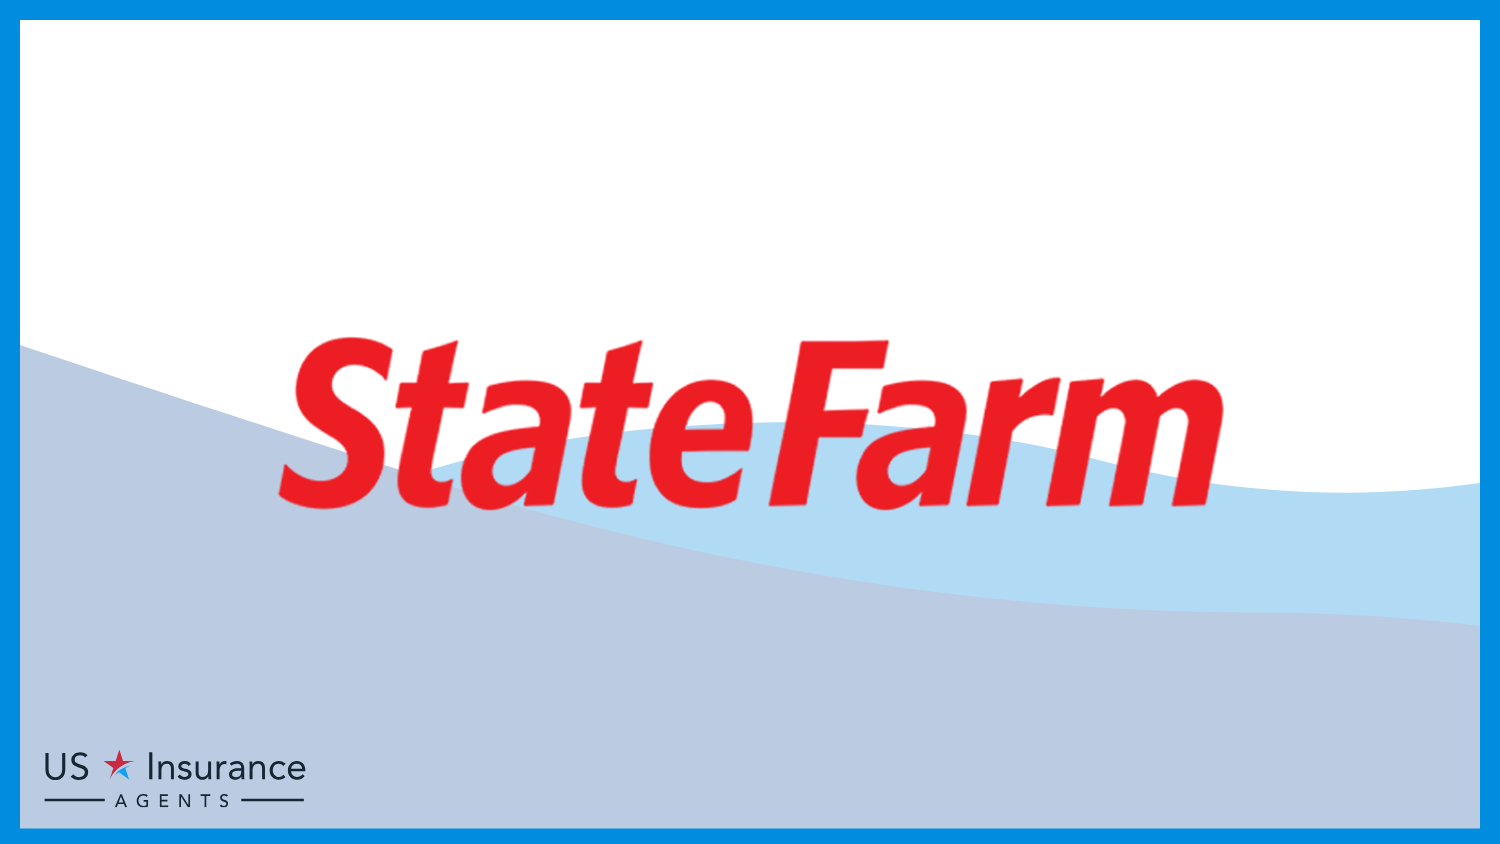 State Farm: Best Mobile Home Insurance in Texas